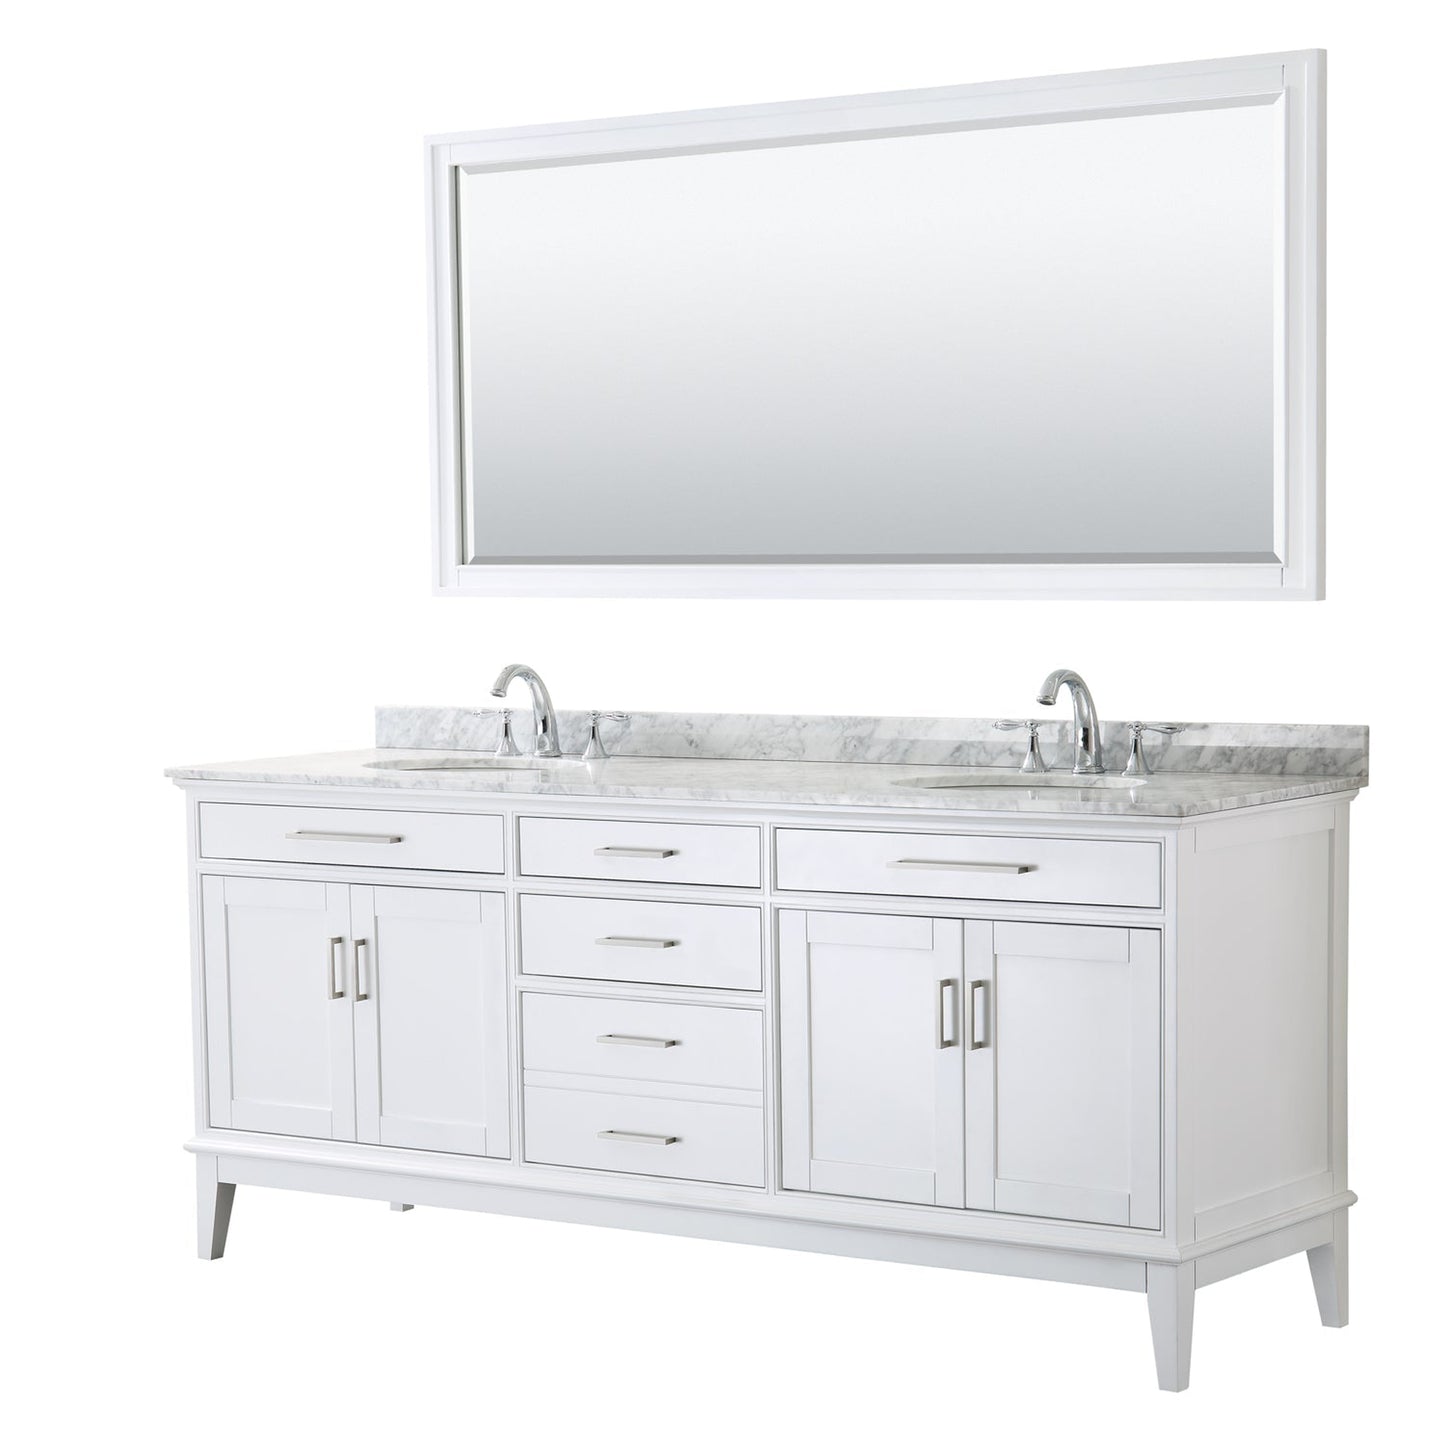 Wyndham Collection Margate 80" Double Bathroom White Vanity With White Carrara Marble Countertop, Undermount Oval Sink And 70" Mirror